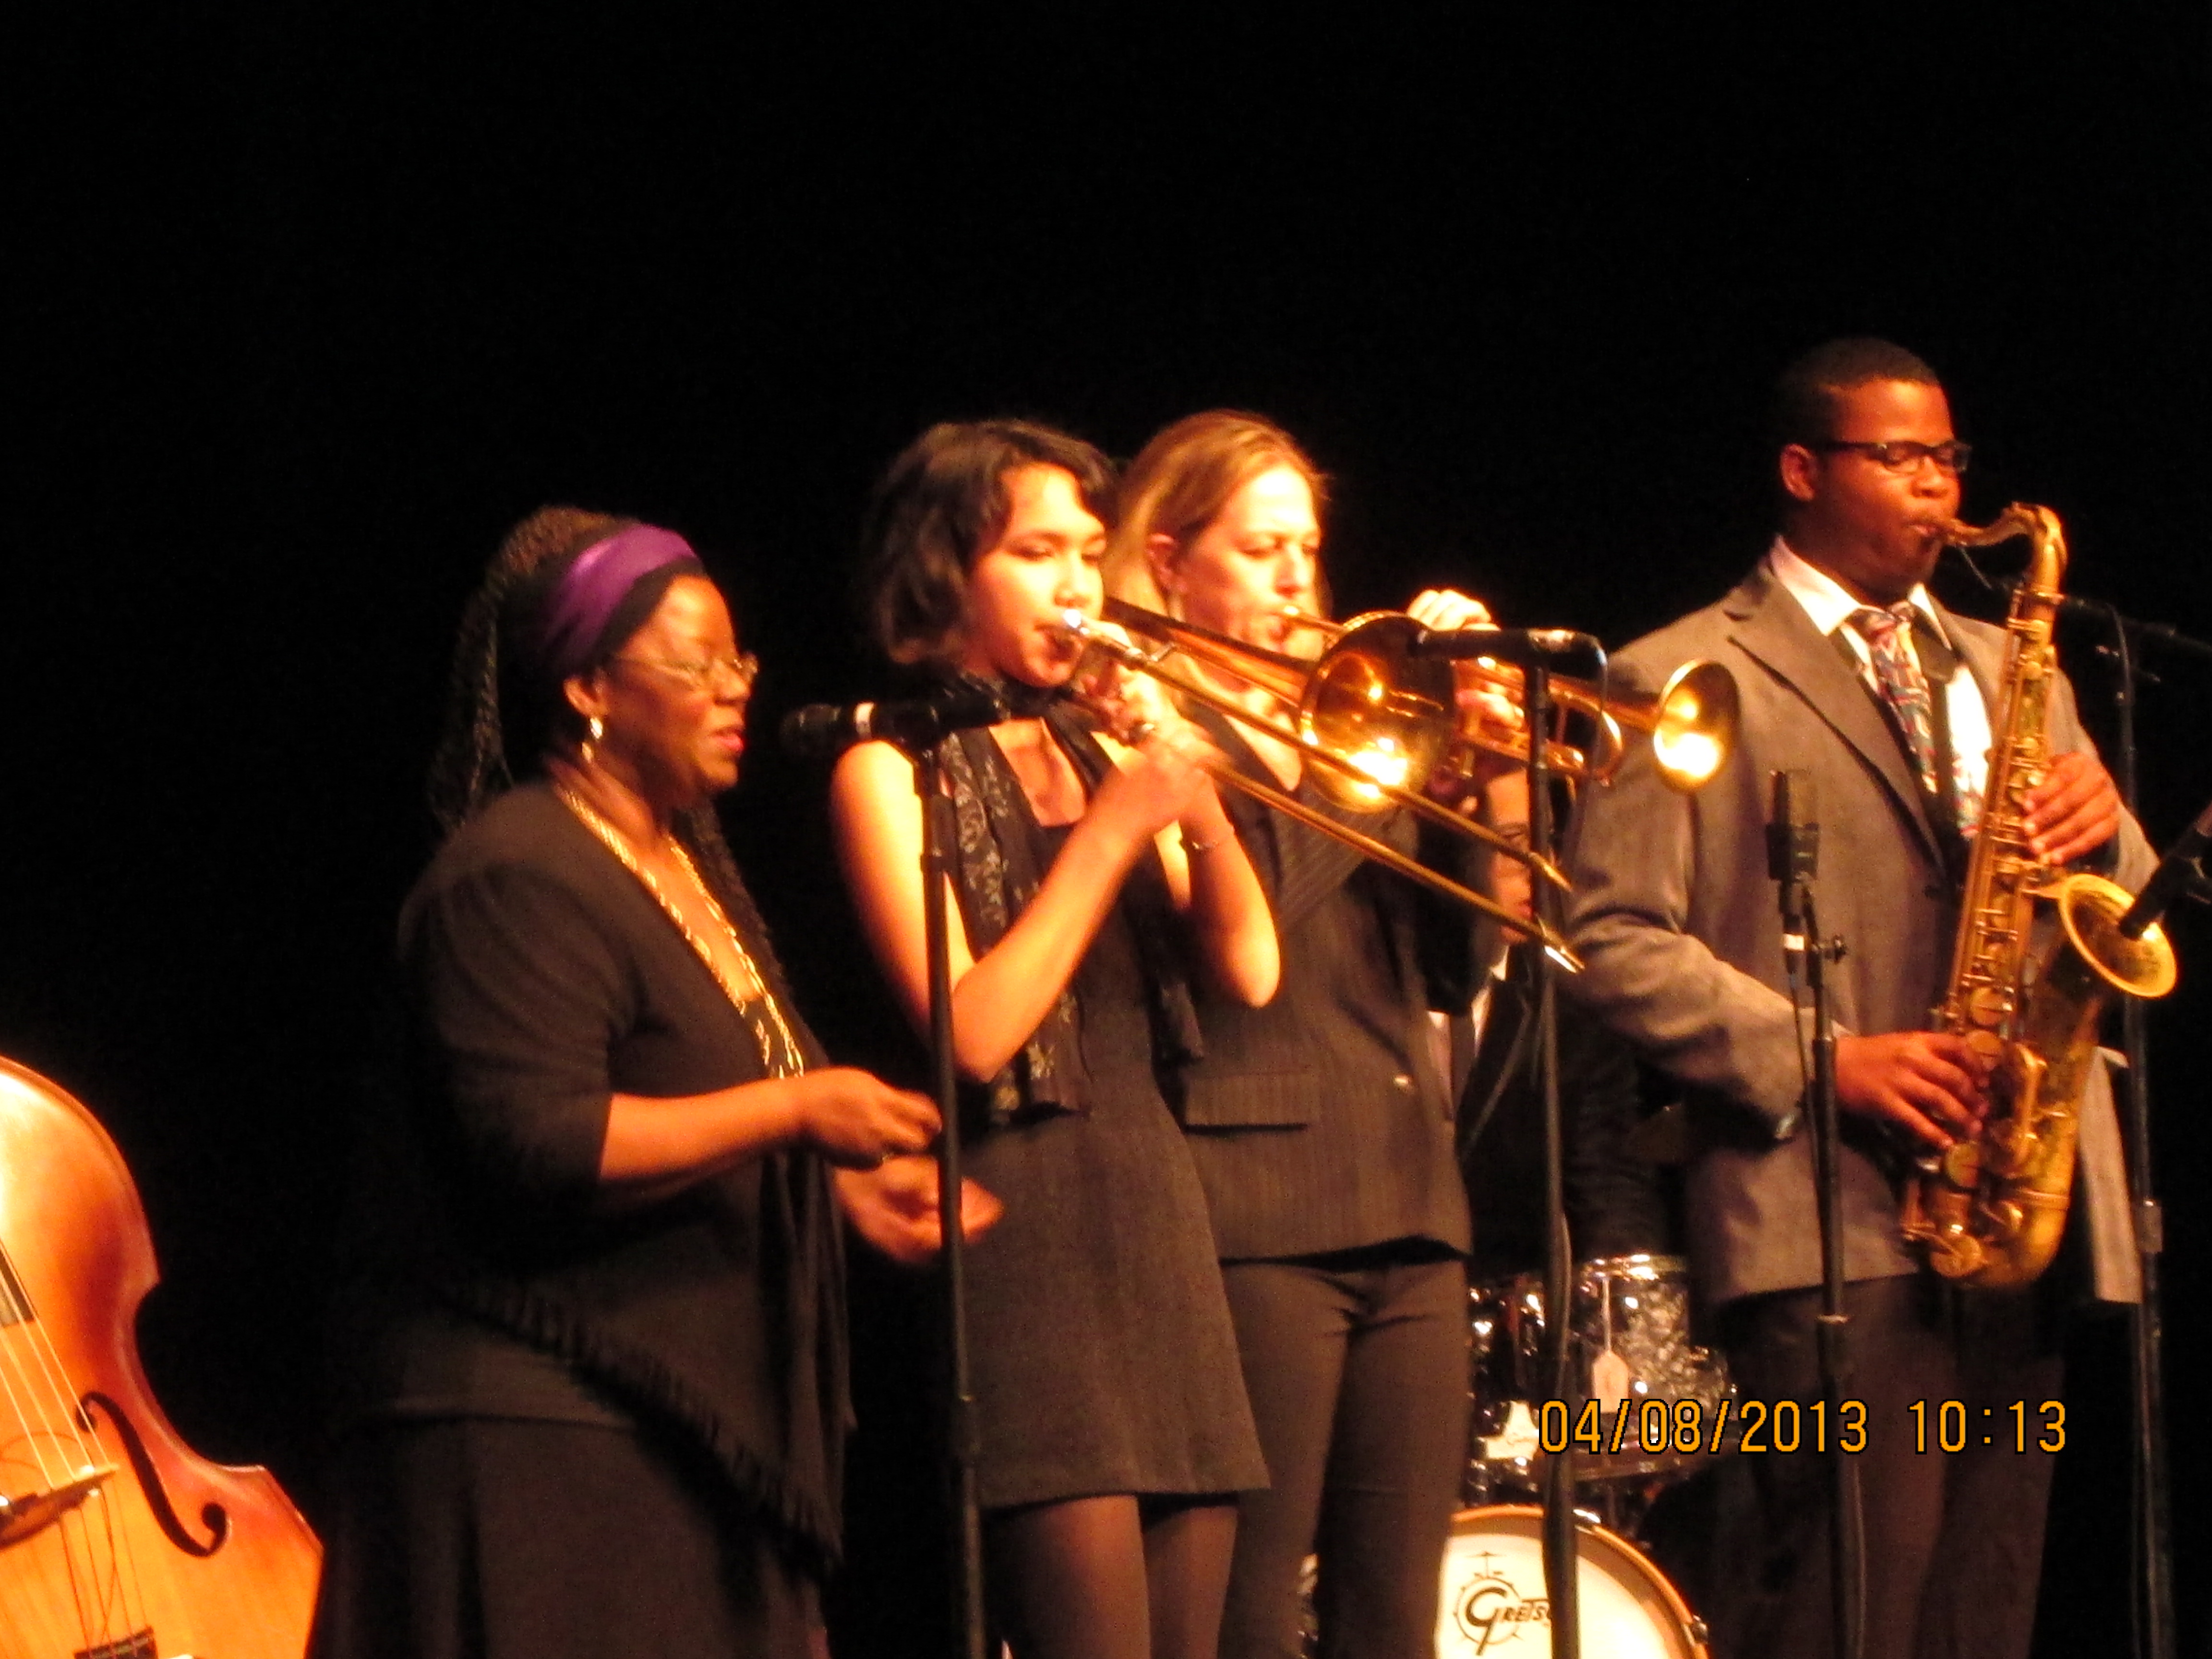 Photo: Blues Vocalist Lisa Henry, Jazz Trumpeter Ingrid Jensen, and students from the Los Angeles County High School for the Arts perform for Mississippi students.